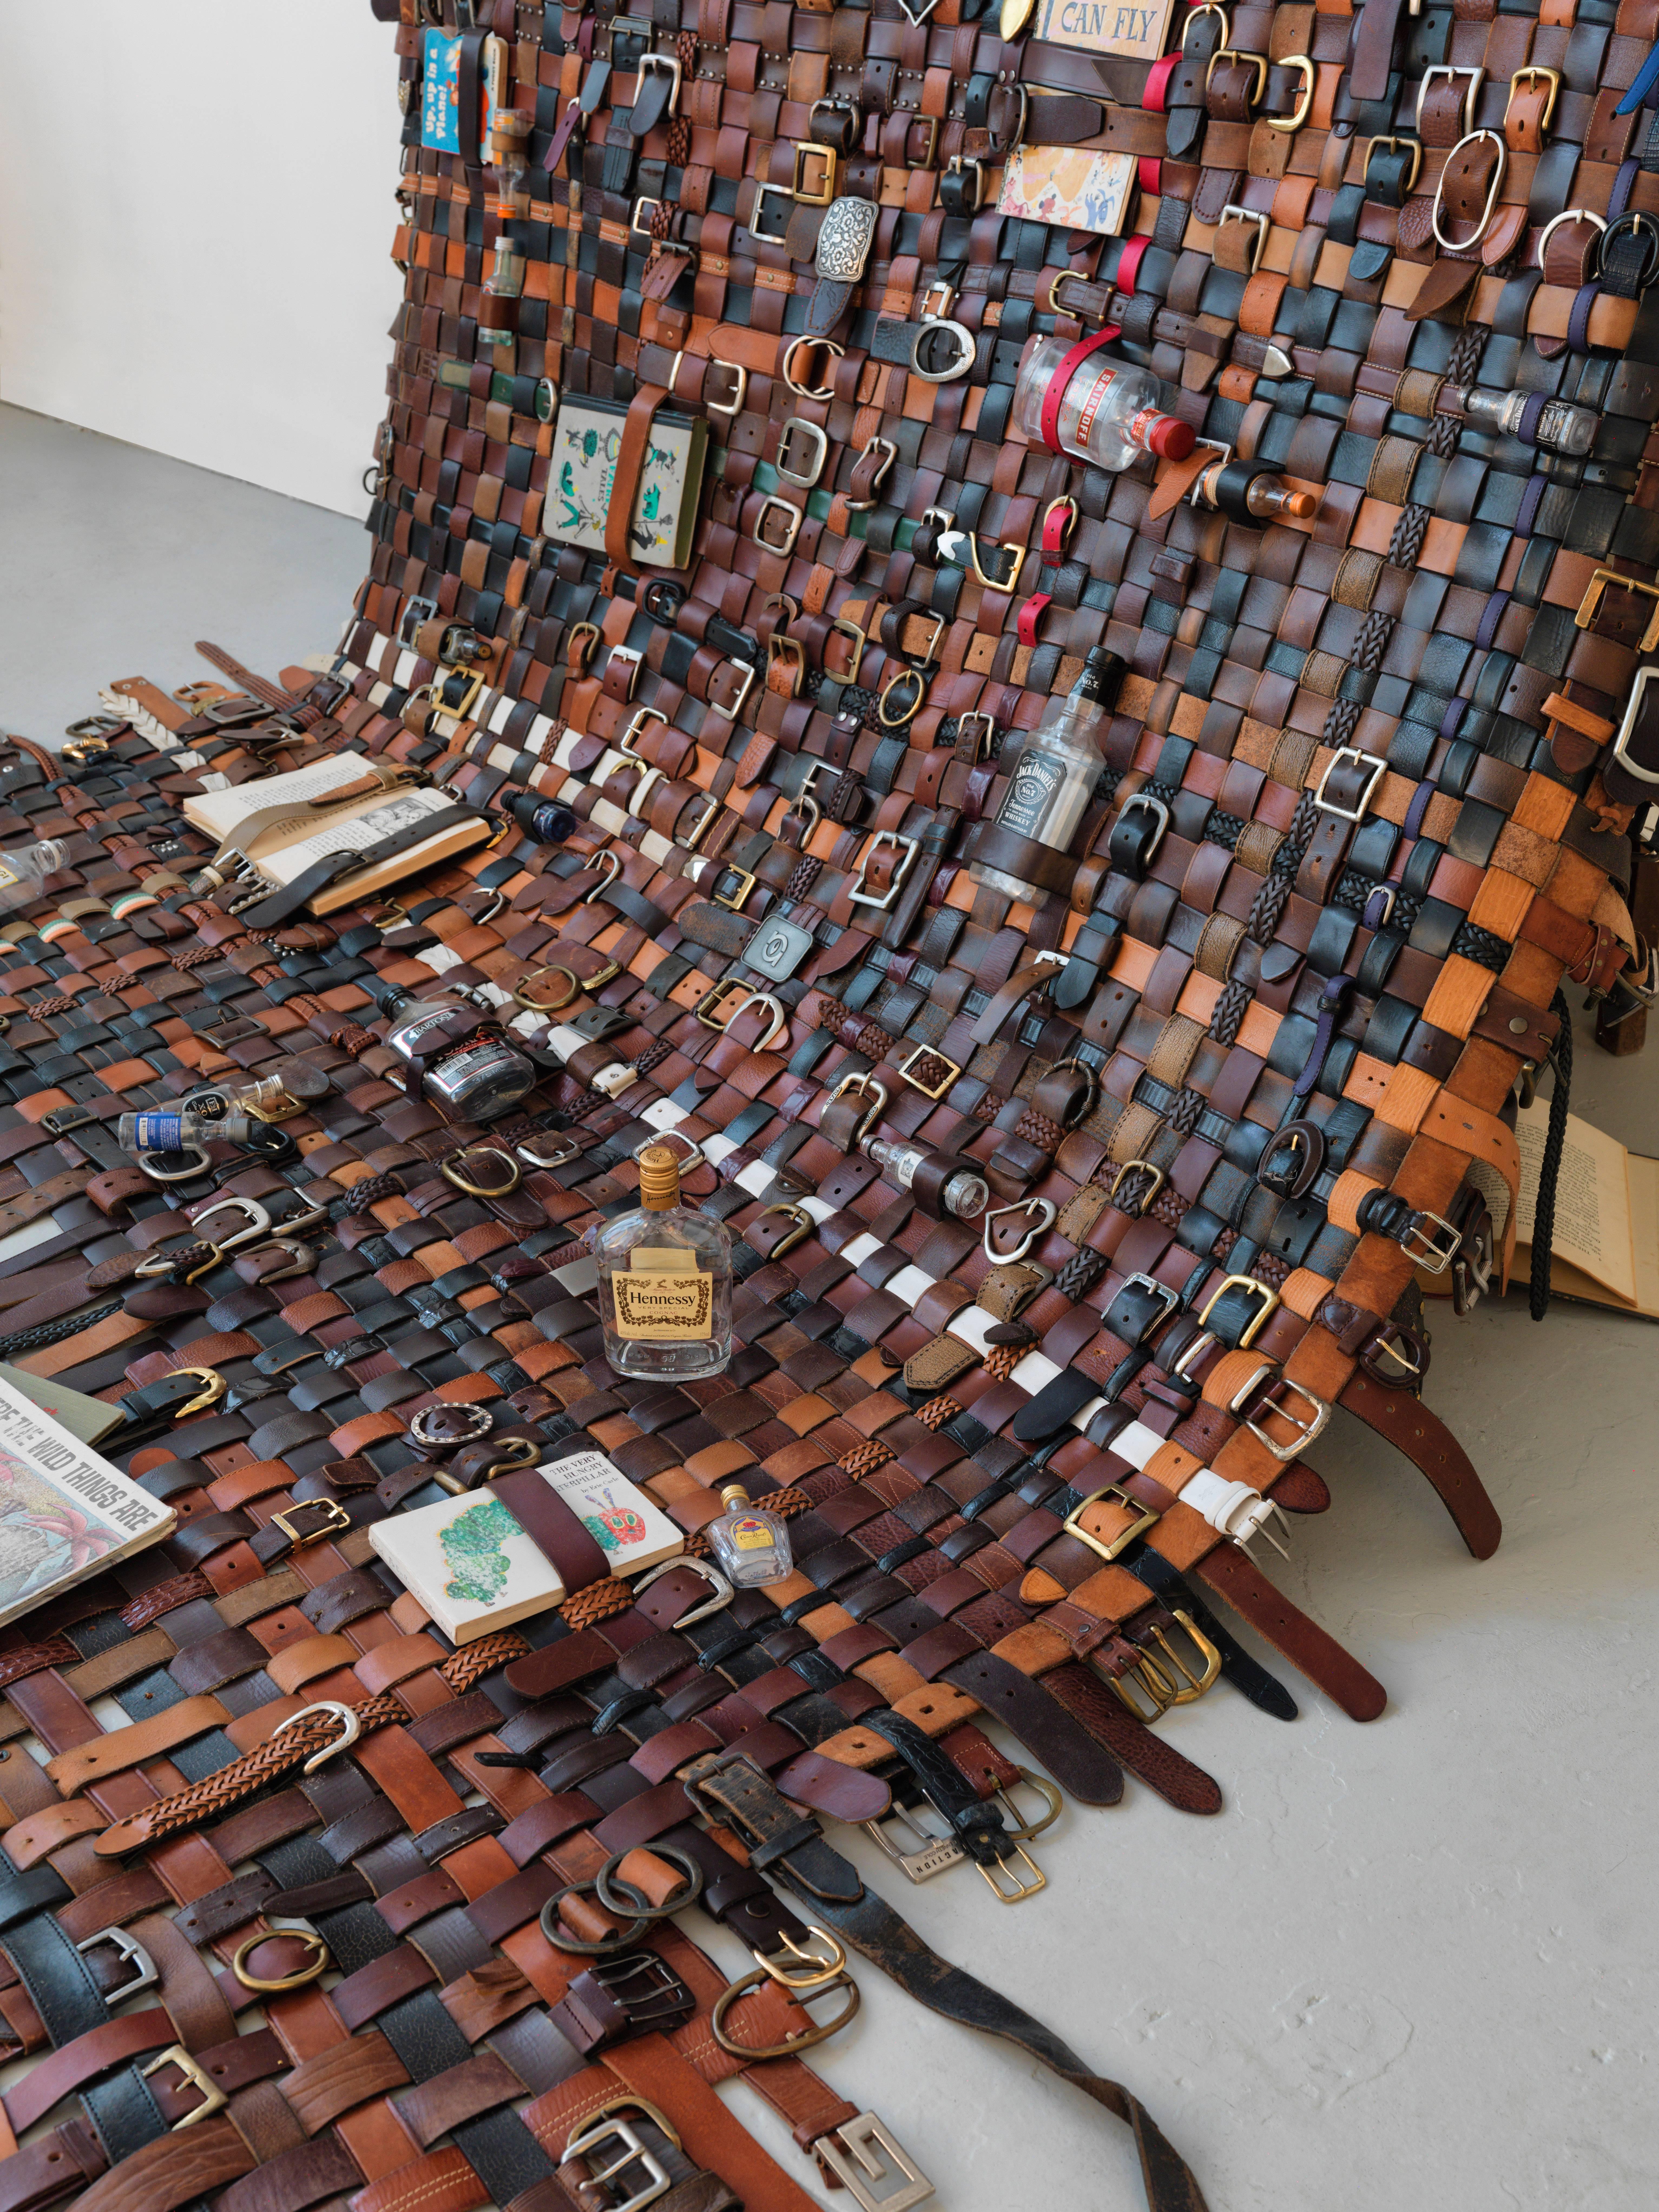 medium: found leather belts, books, liquor bottles, and child's wooden chair

Paul Villinski has created studio and large-scale artworks for more than three decades. Villinski was born in York, Maine, USA, in 1960, son of an Air Force navigator. He